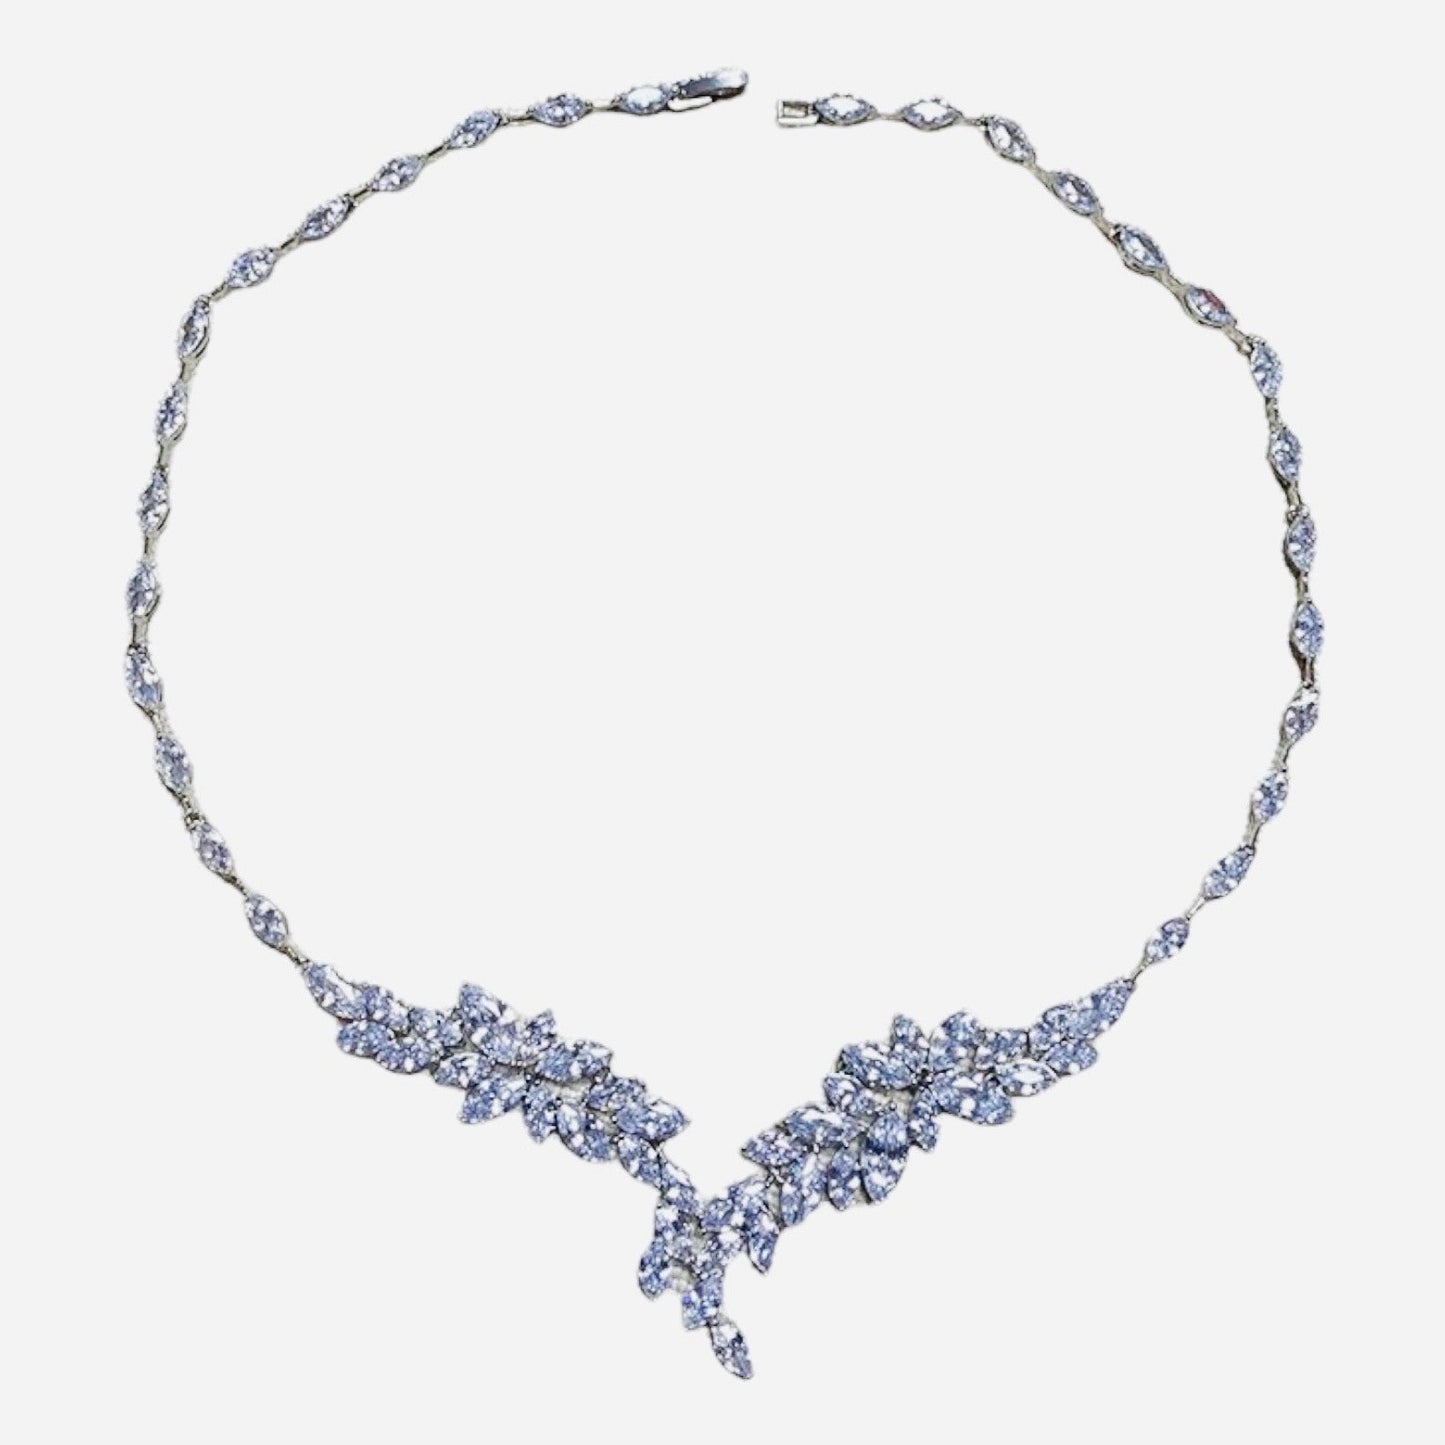 Seraphina Marquise Floral Crystal Bridal Pendant Necklace